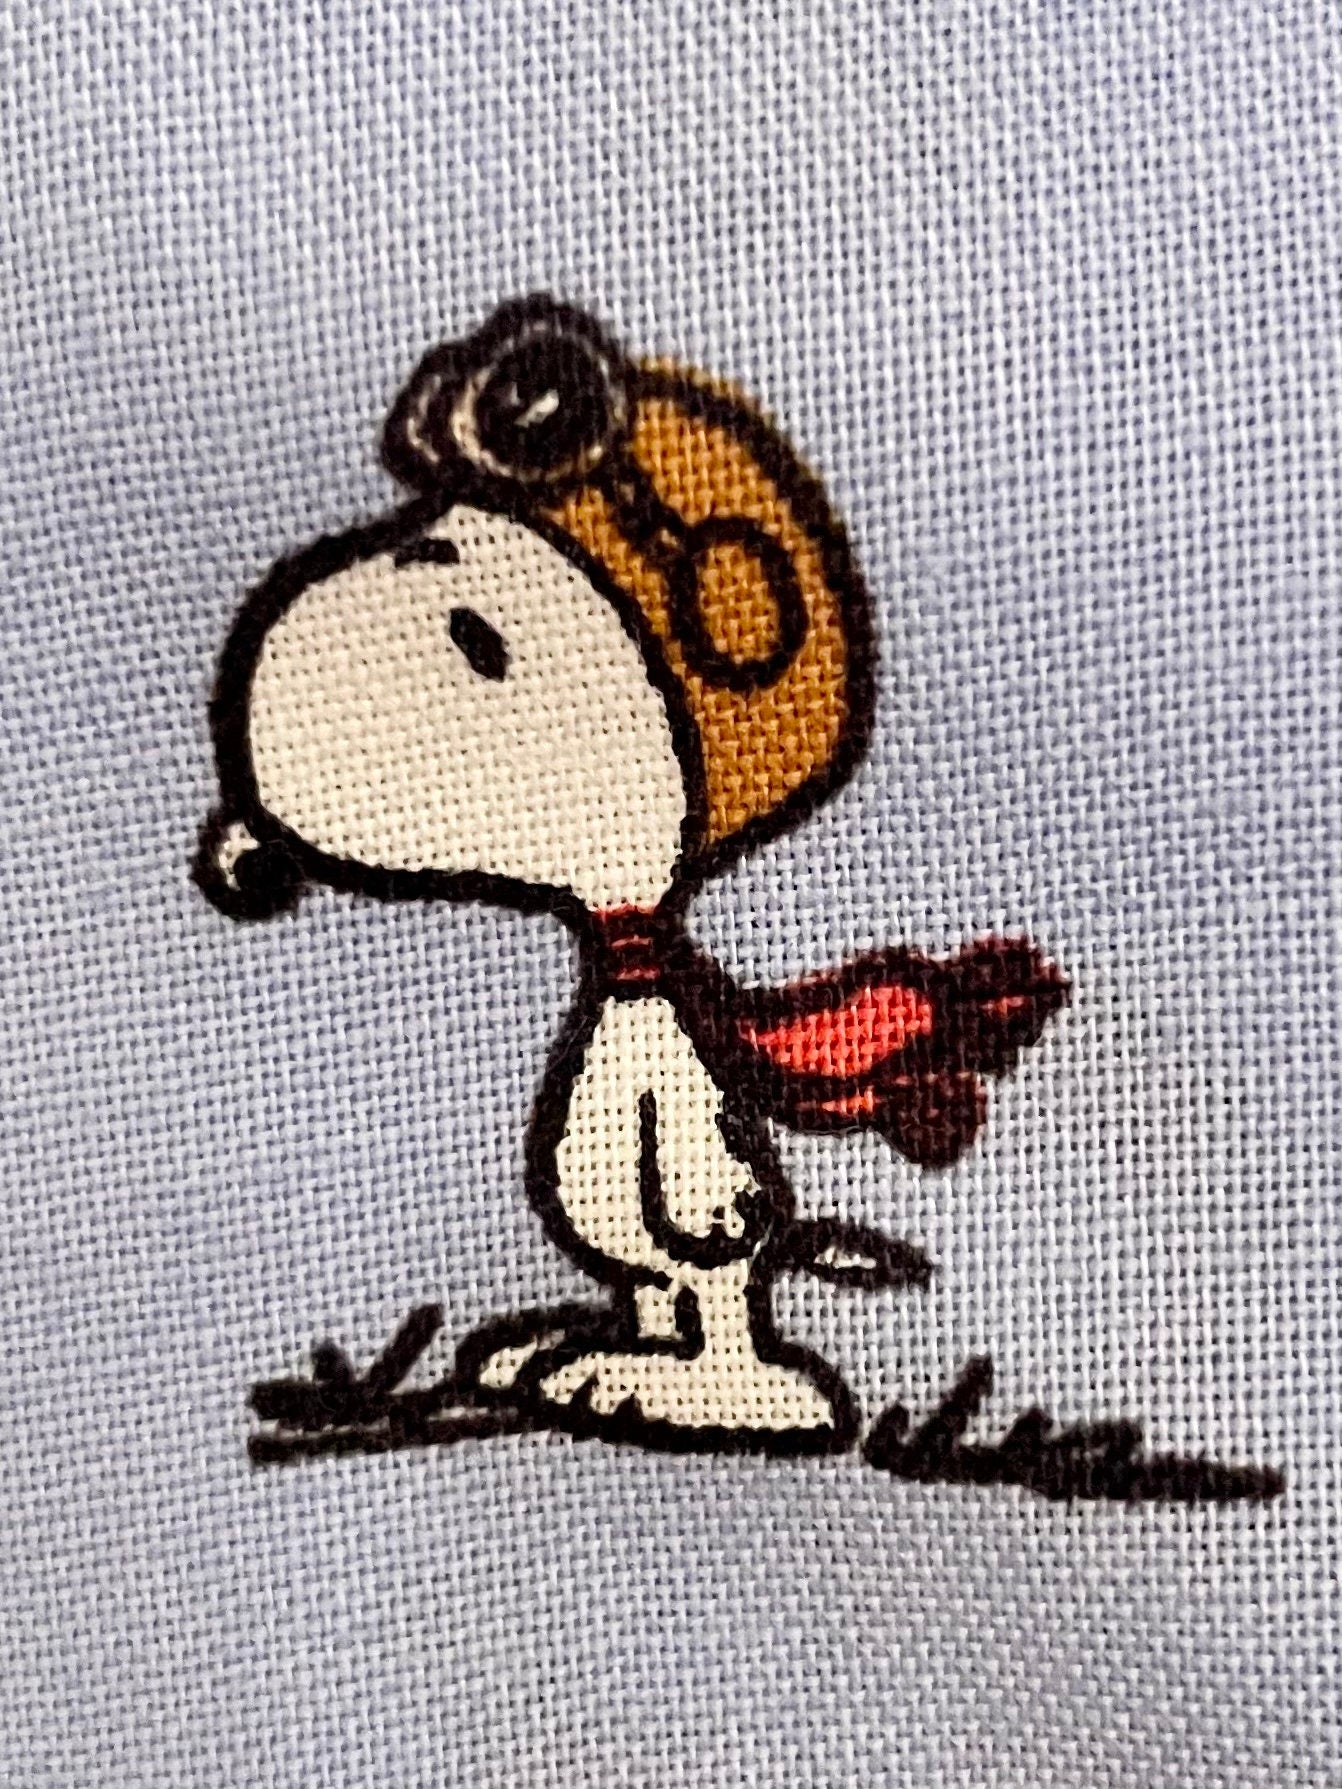 Cutest Snoopy Red Baron blanket ever!